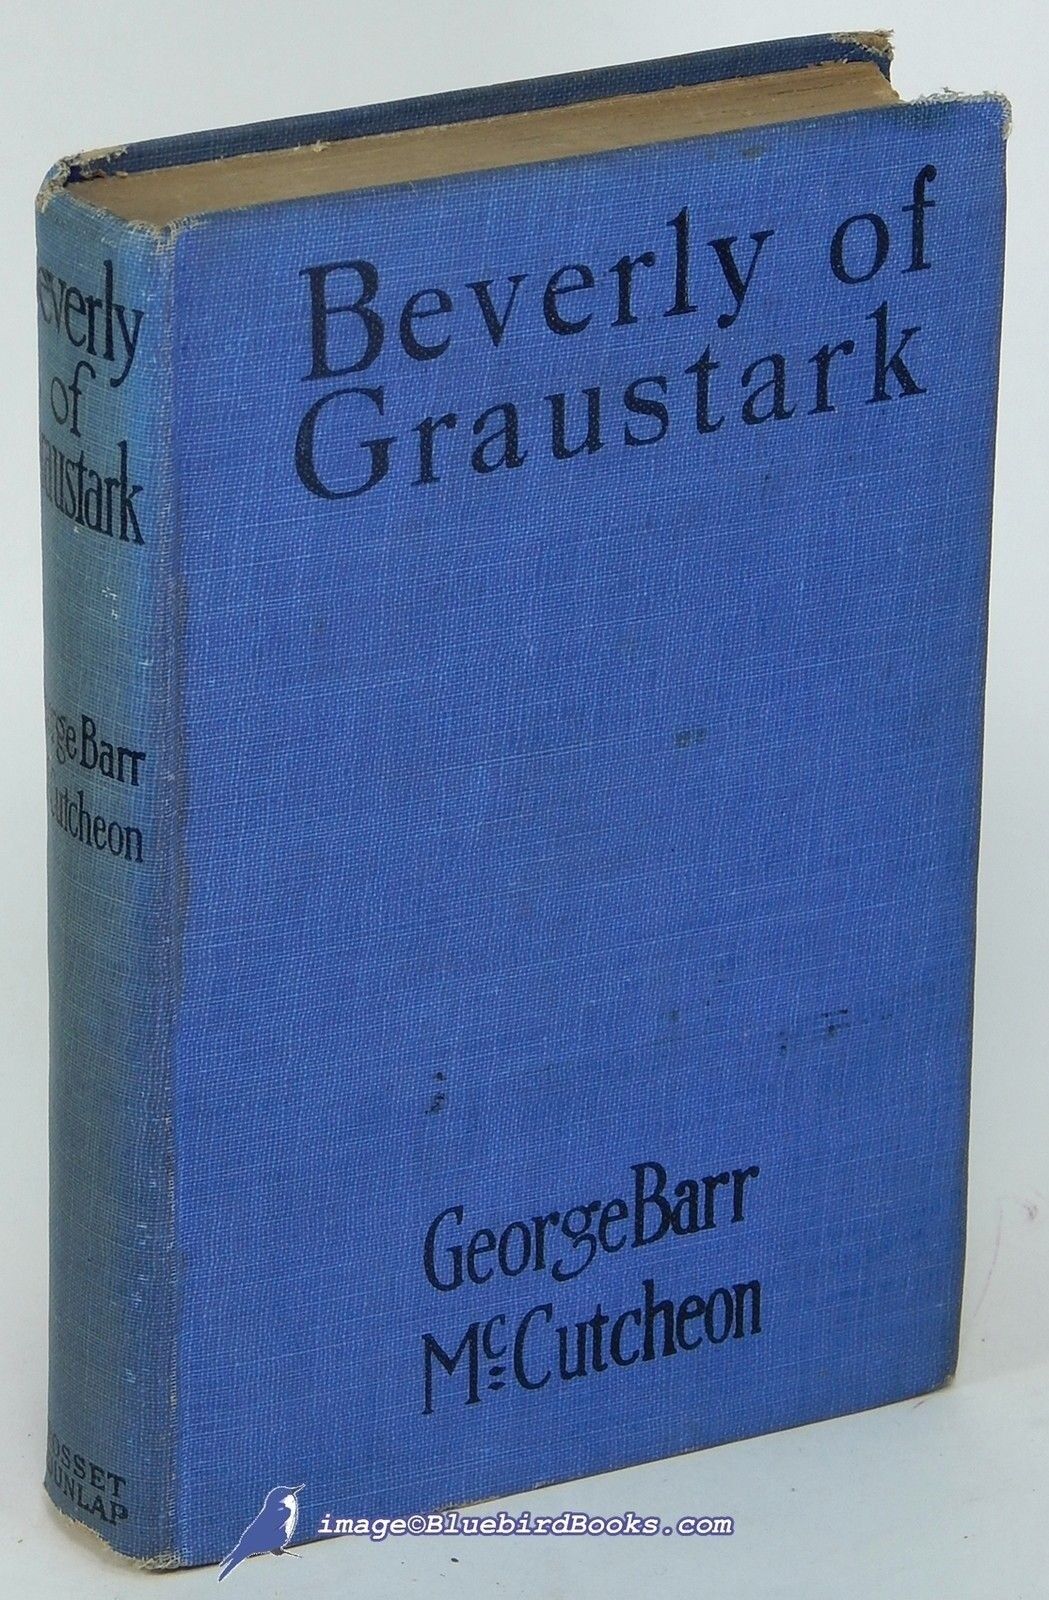 Beverly of Graustark by George Barr McCUTCHEON VG- Photoplay edition 80507